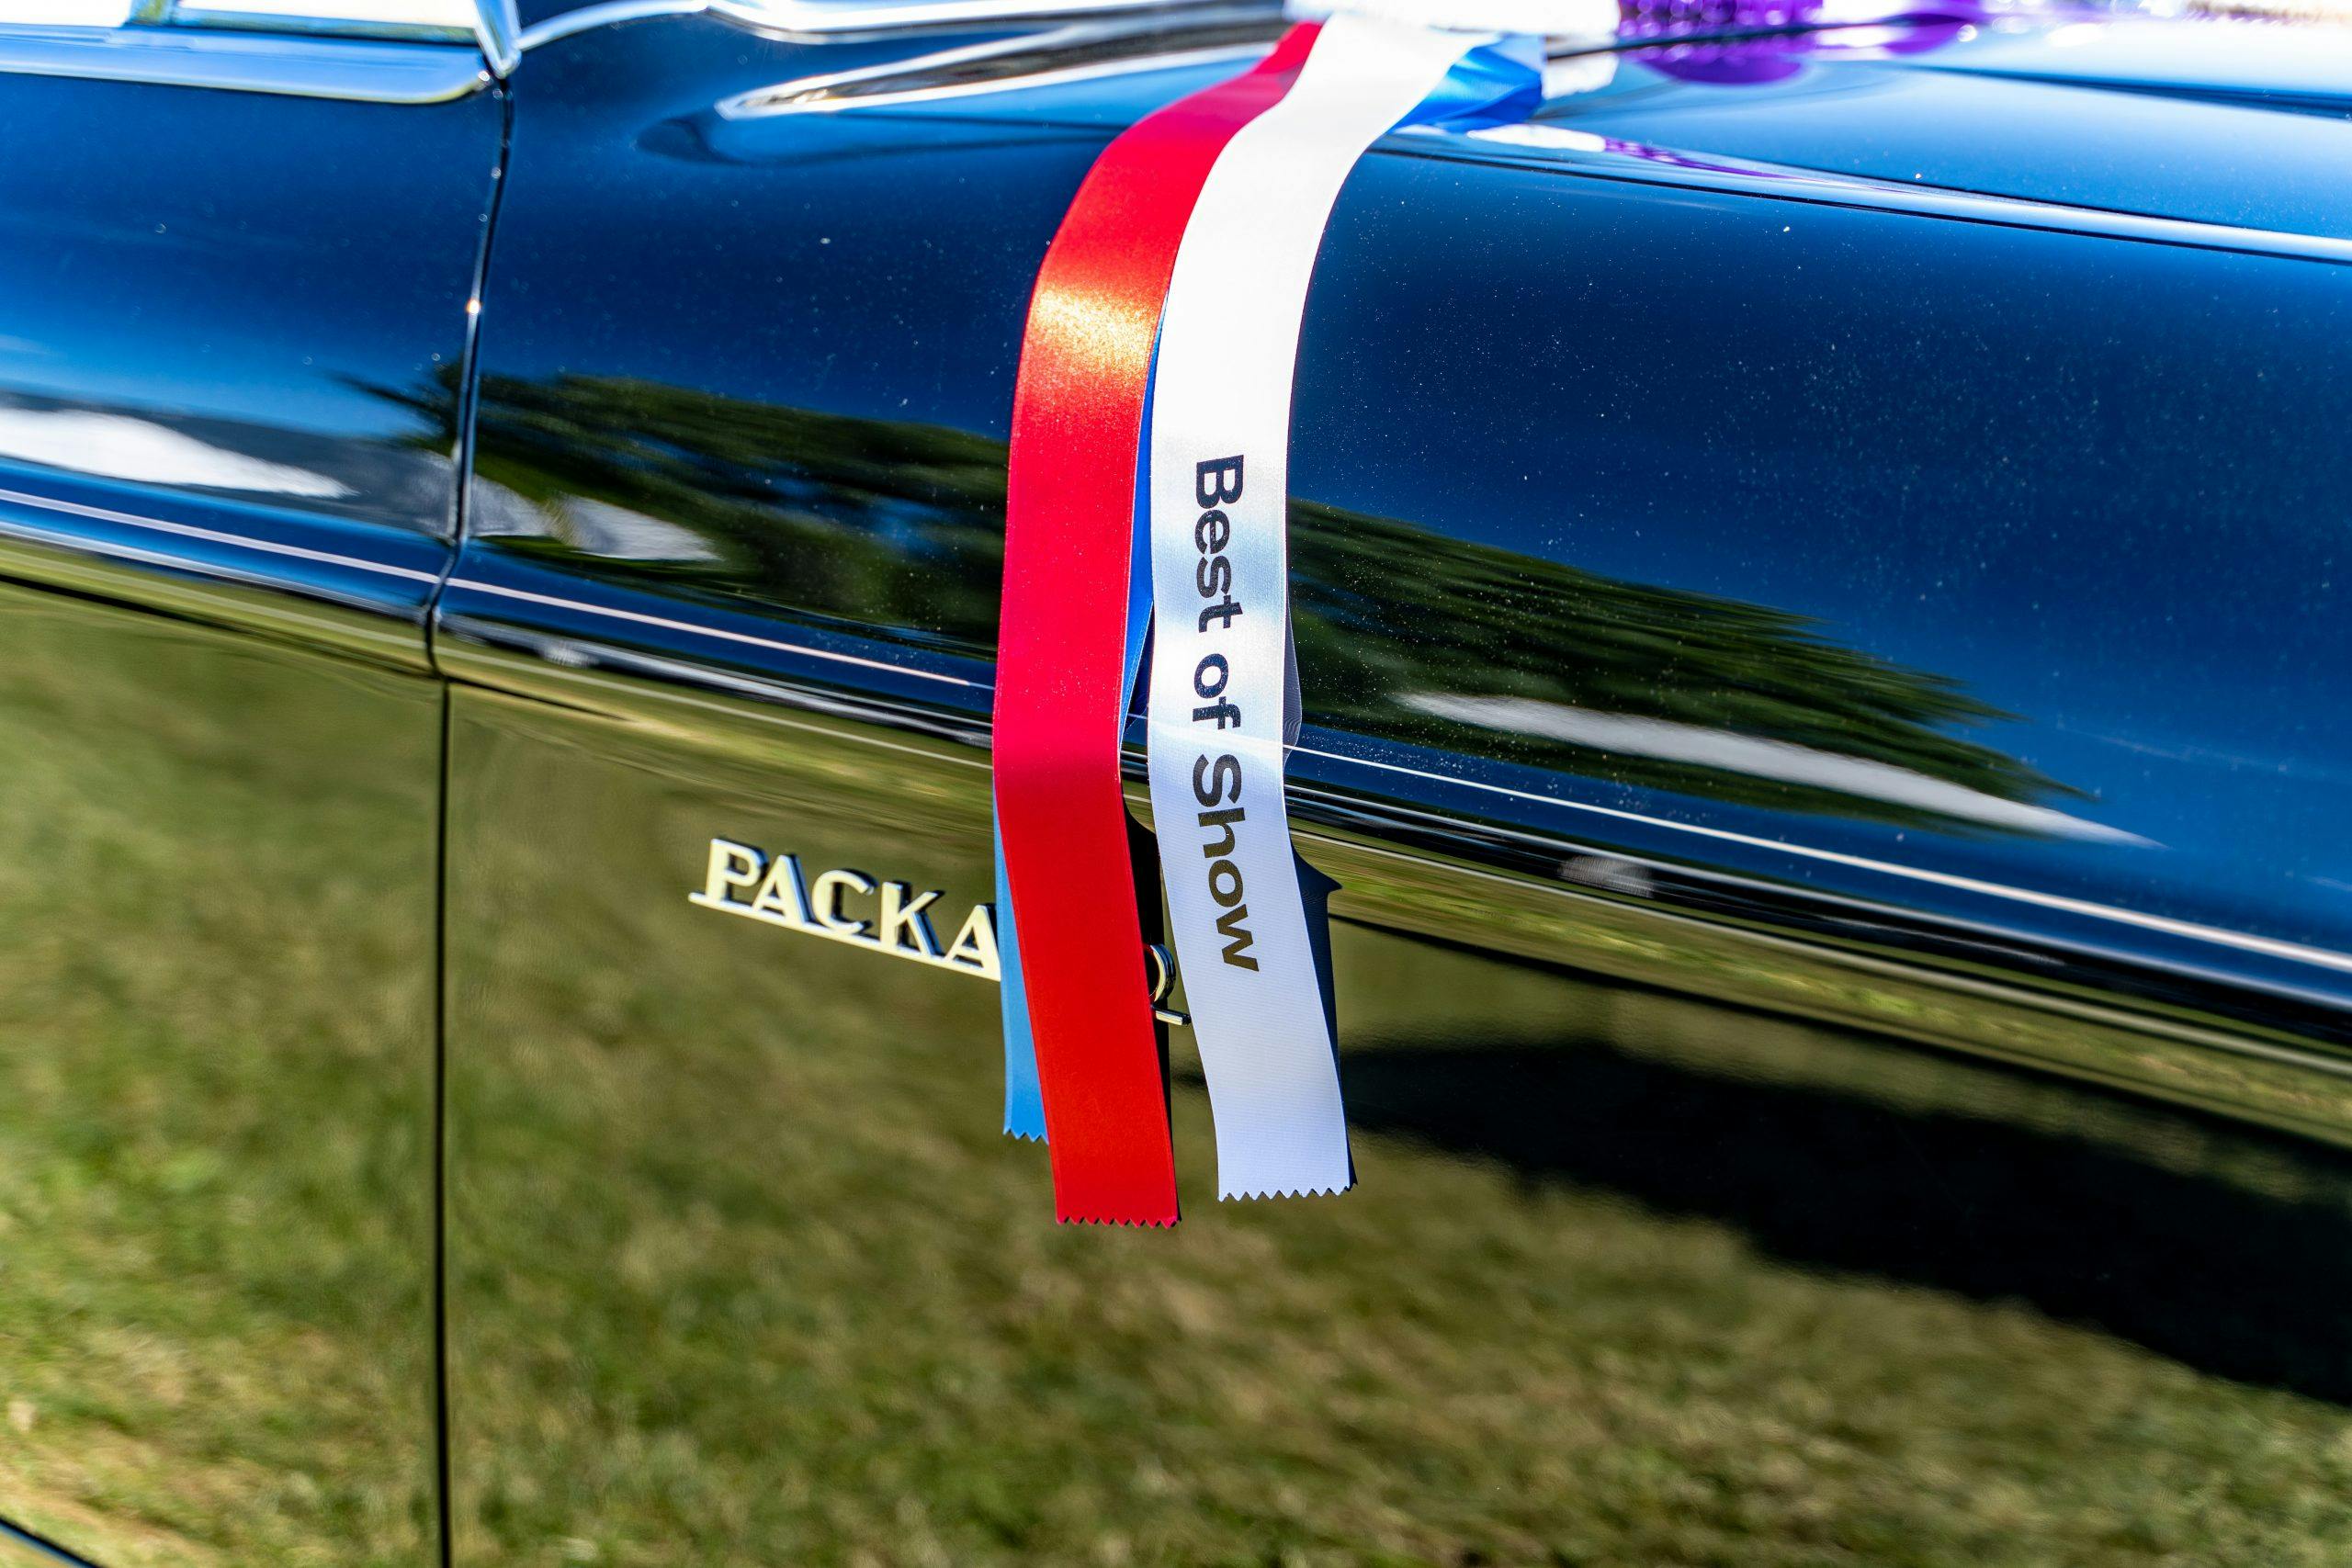 1948 Packard Victoria Convertible Eight by Vignale - 2022 Greenwich Best of Show - Ribbon